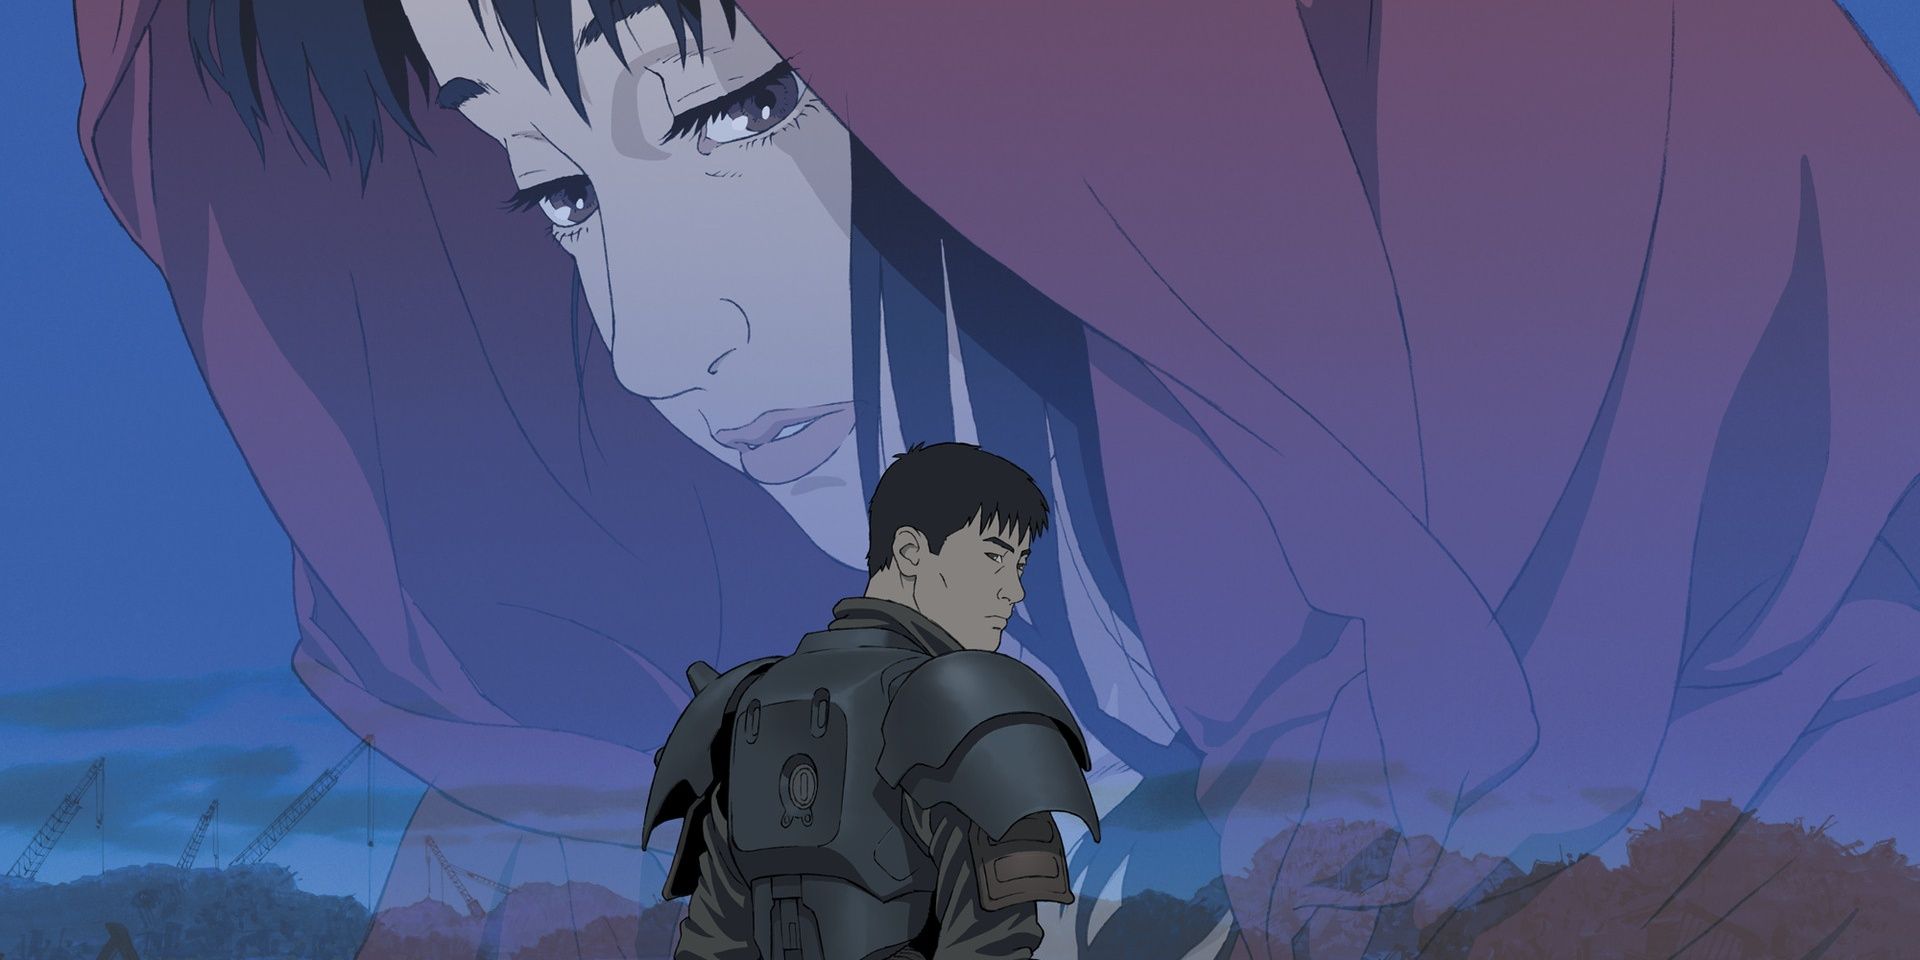 This Underrated '90s Anime Action Movie Is More Relevant Than Ever